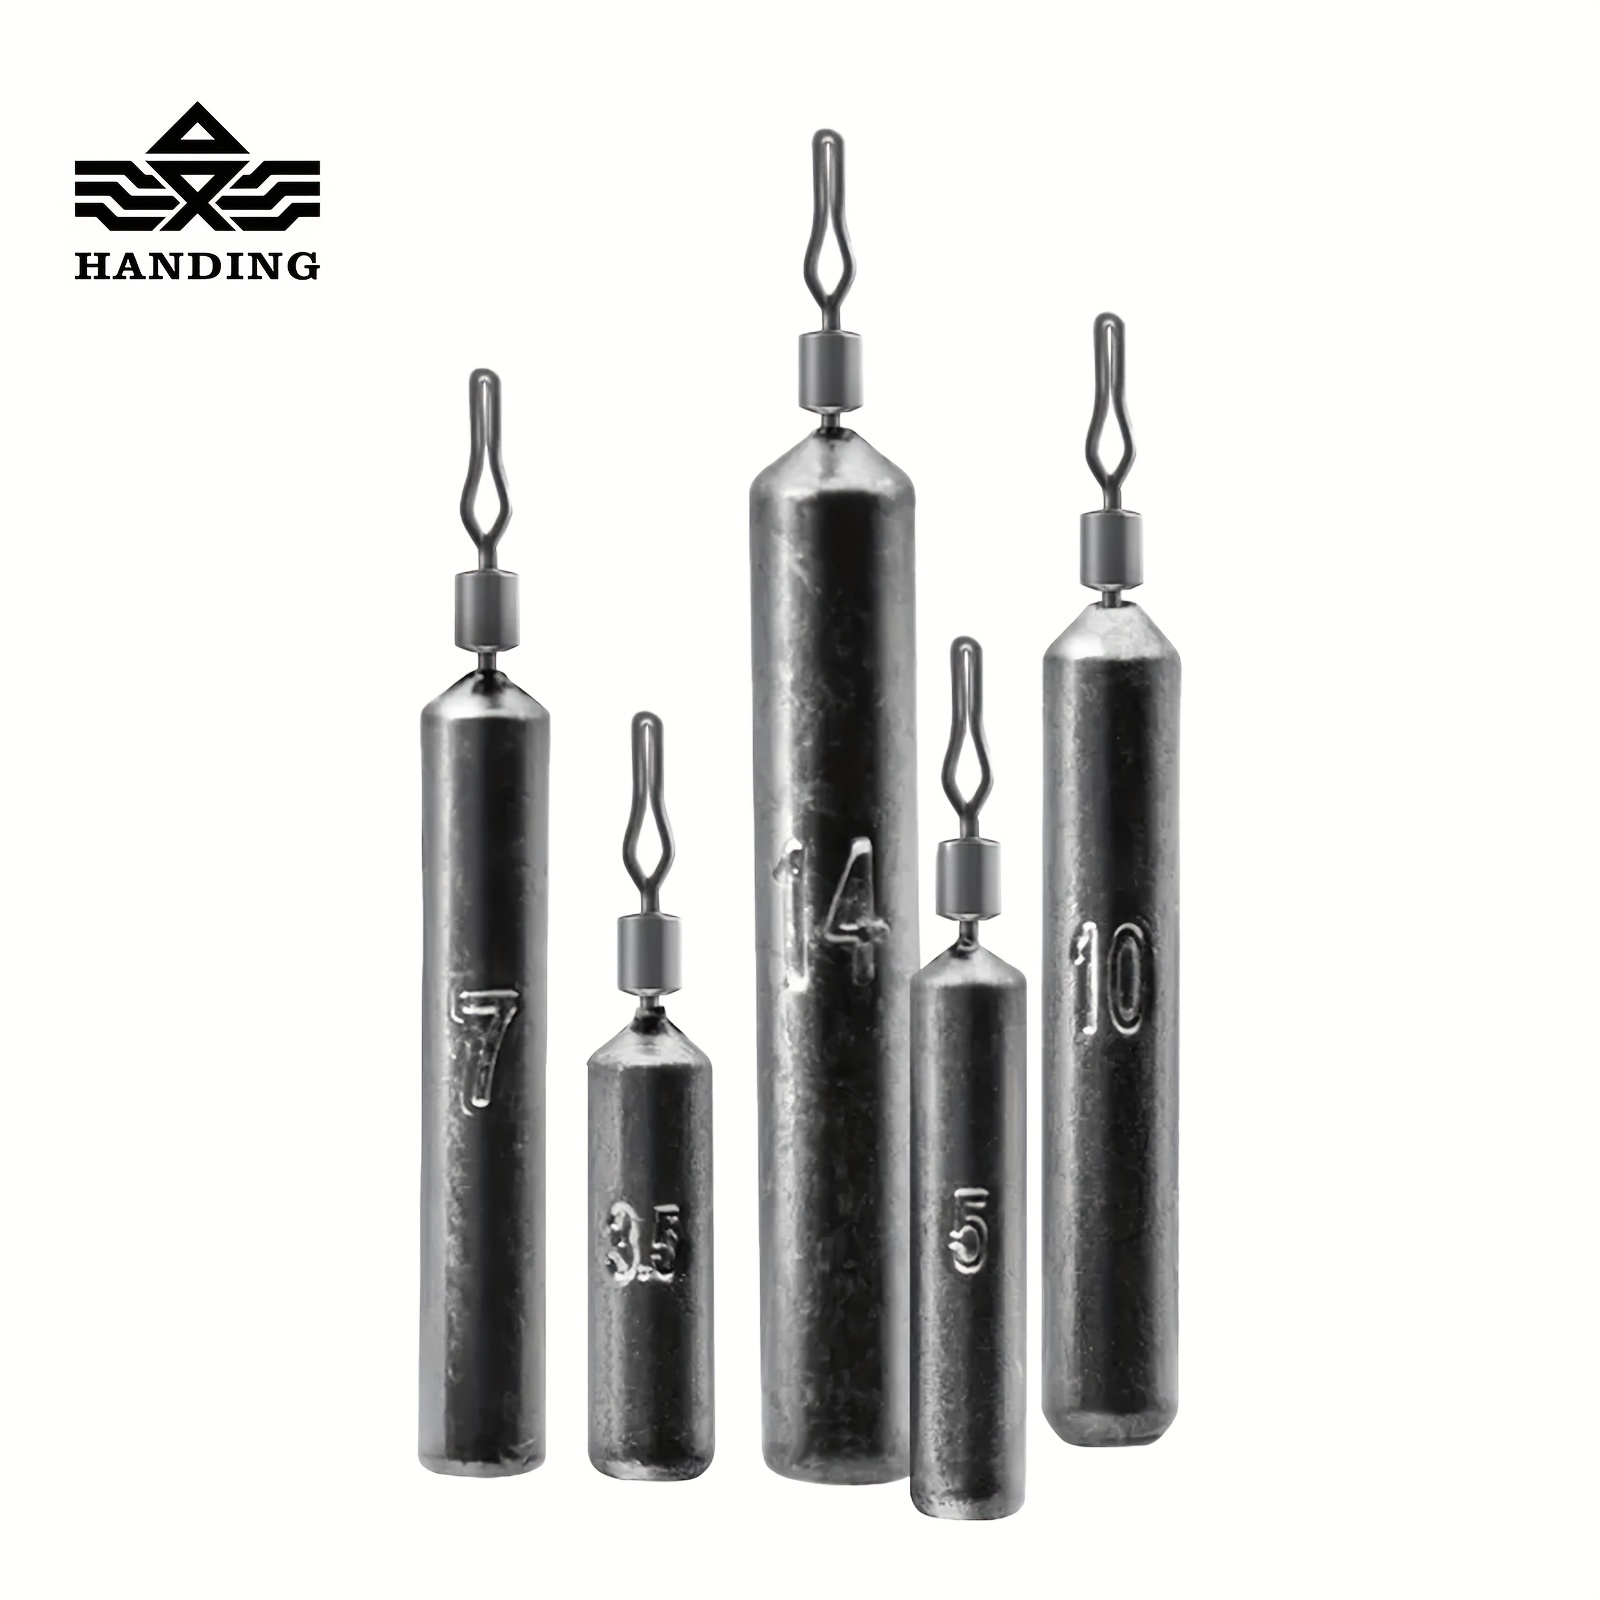 HANDING 10pcs Fishing Lure Inverted Fishing Lead, Fishing Group Weighted  Sinker, Fishing Accessories